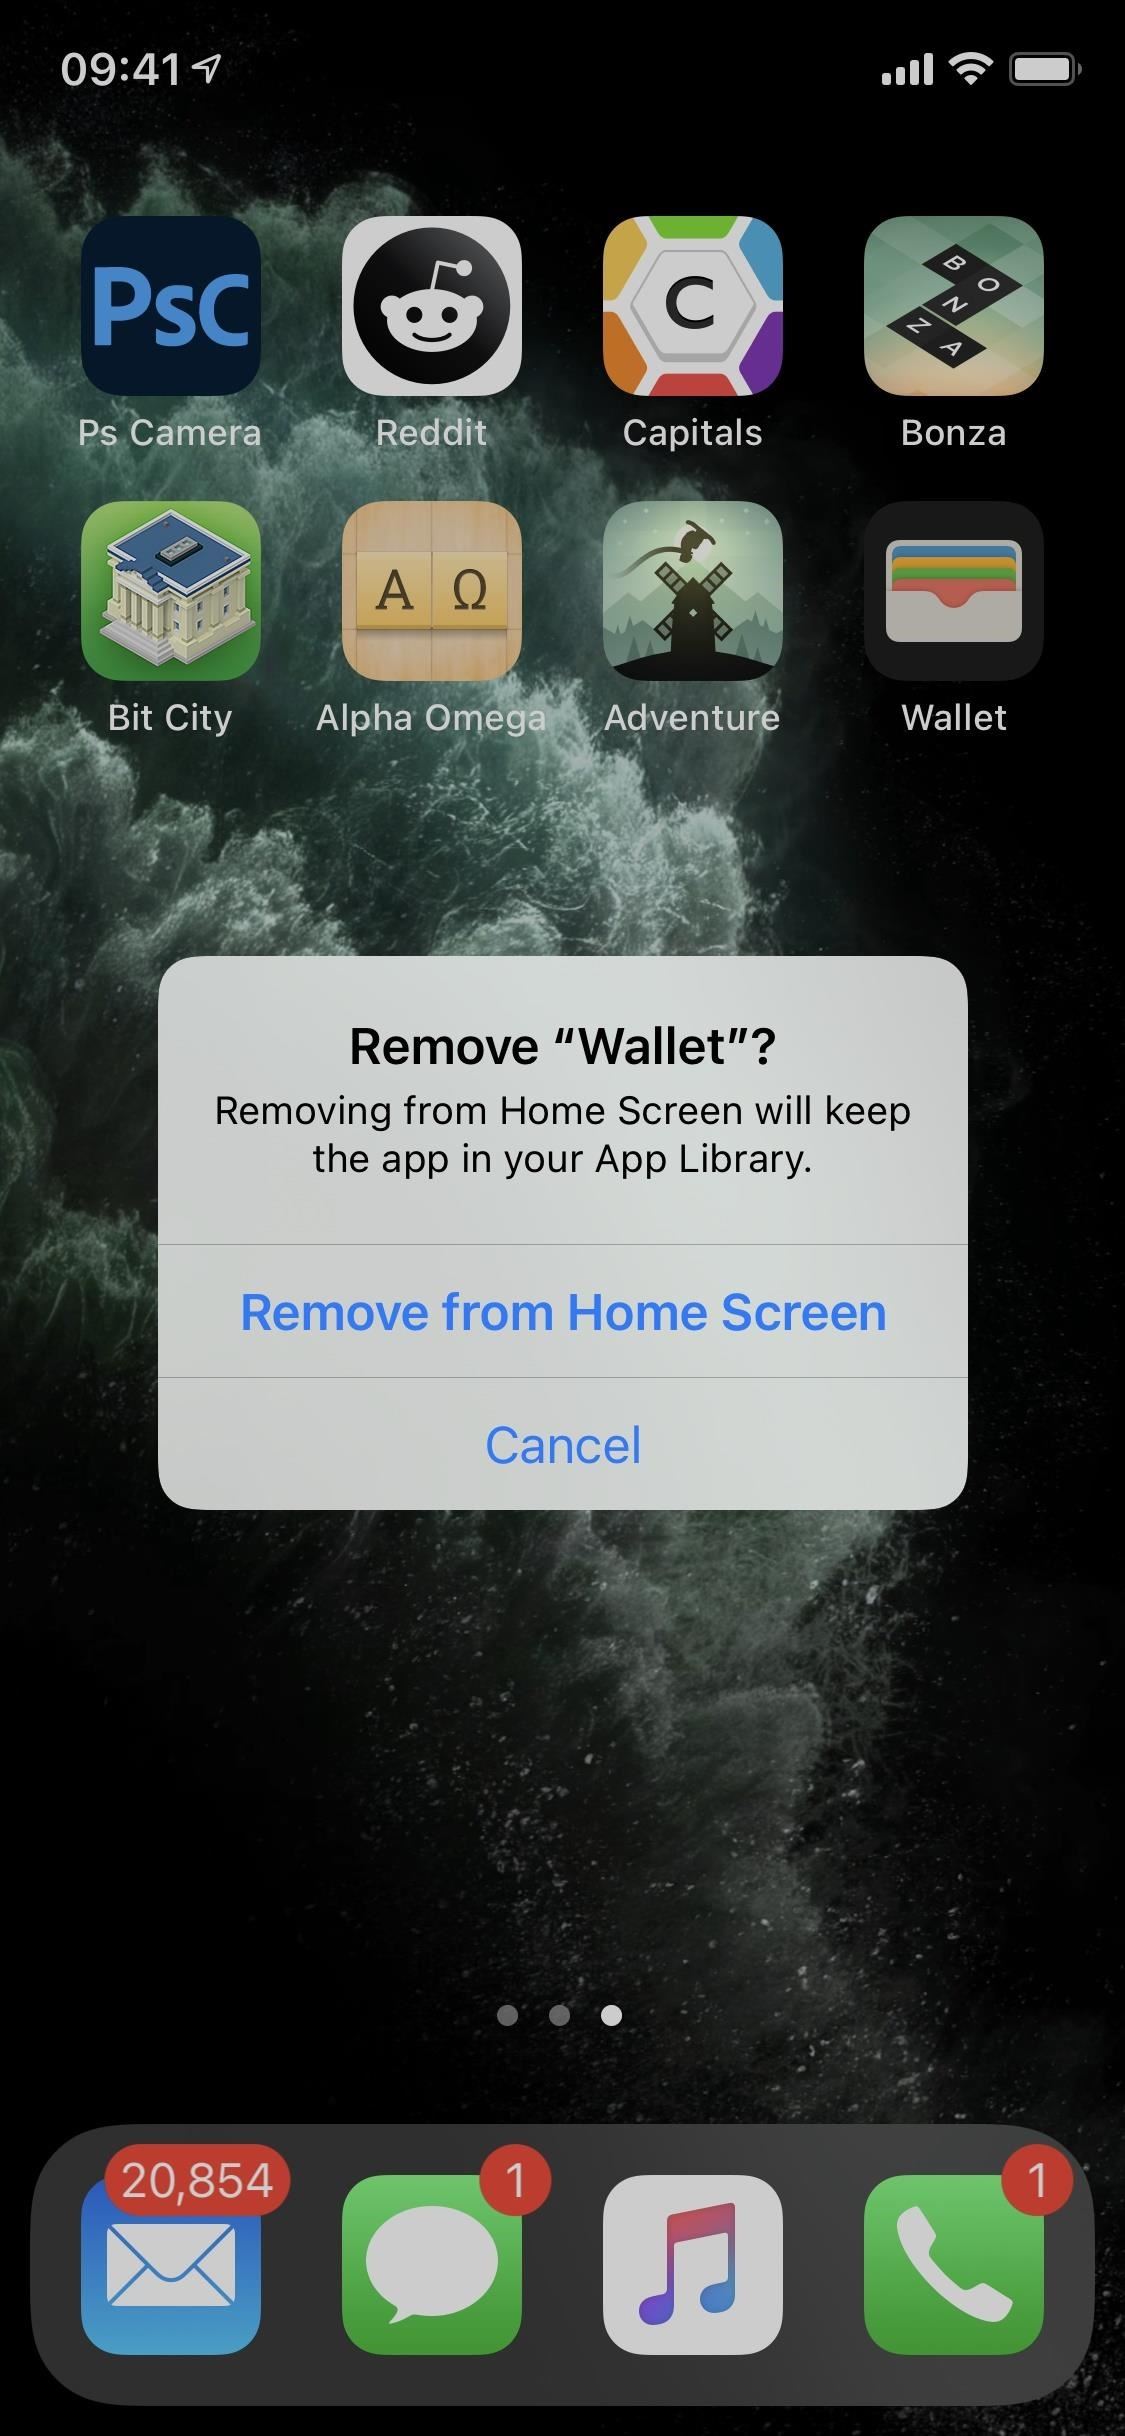 There's a New App Library on Your iPhone's Home Screen — Here's Everything You Need to Know About It in iOS 14